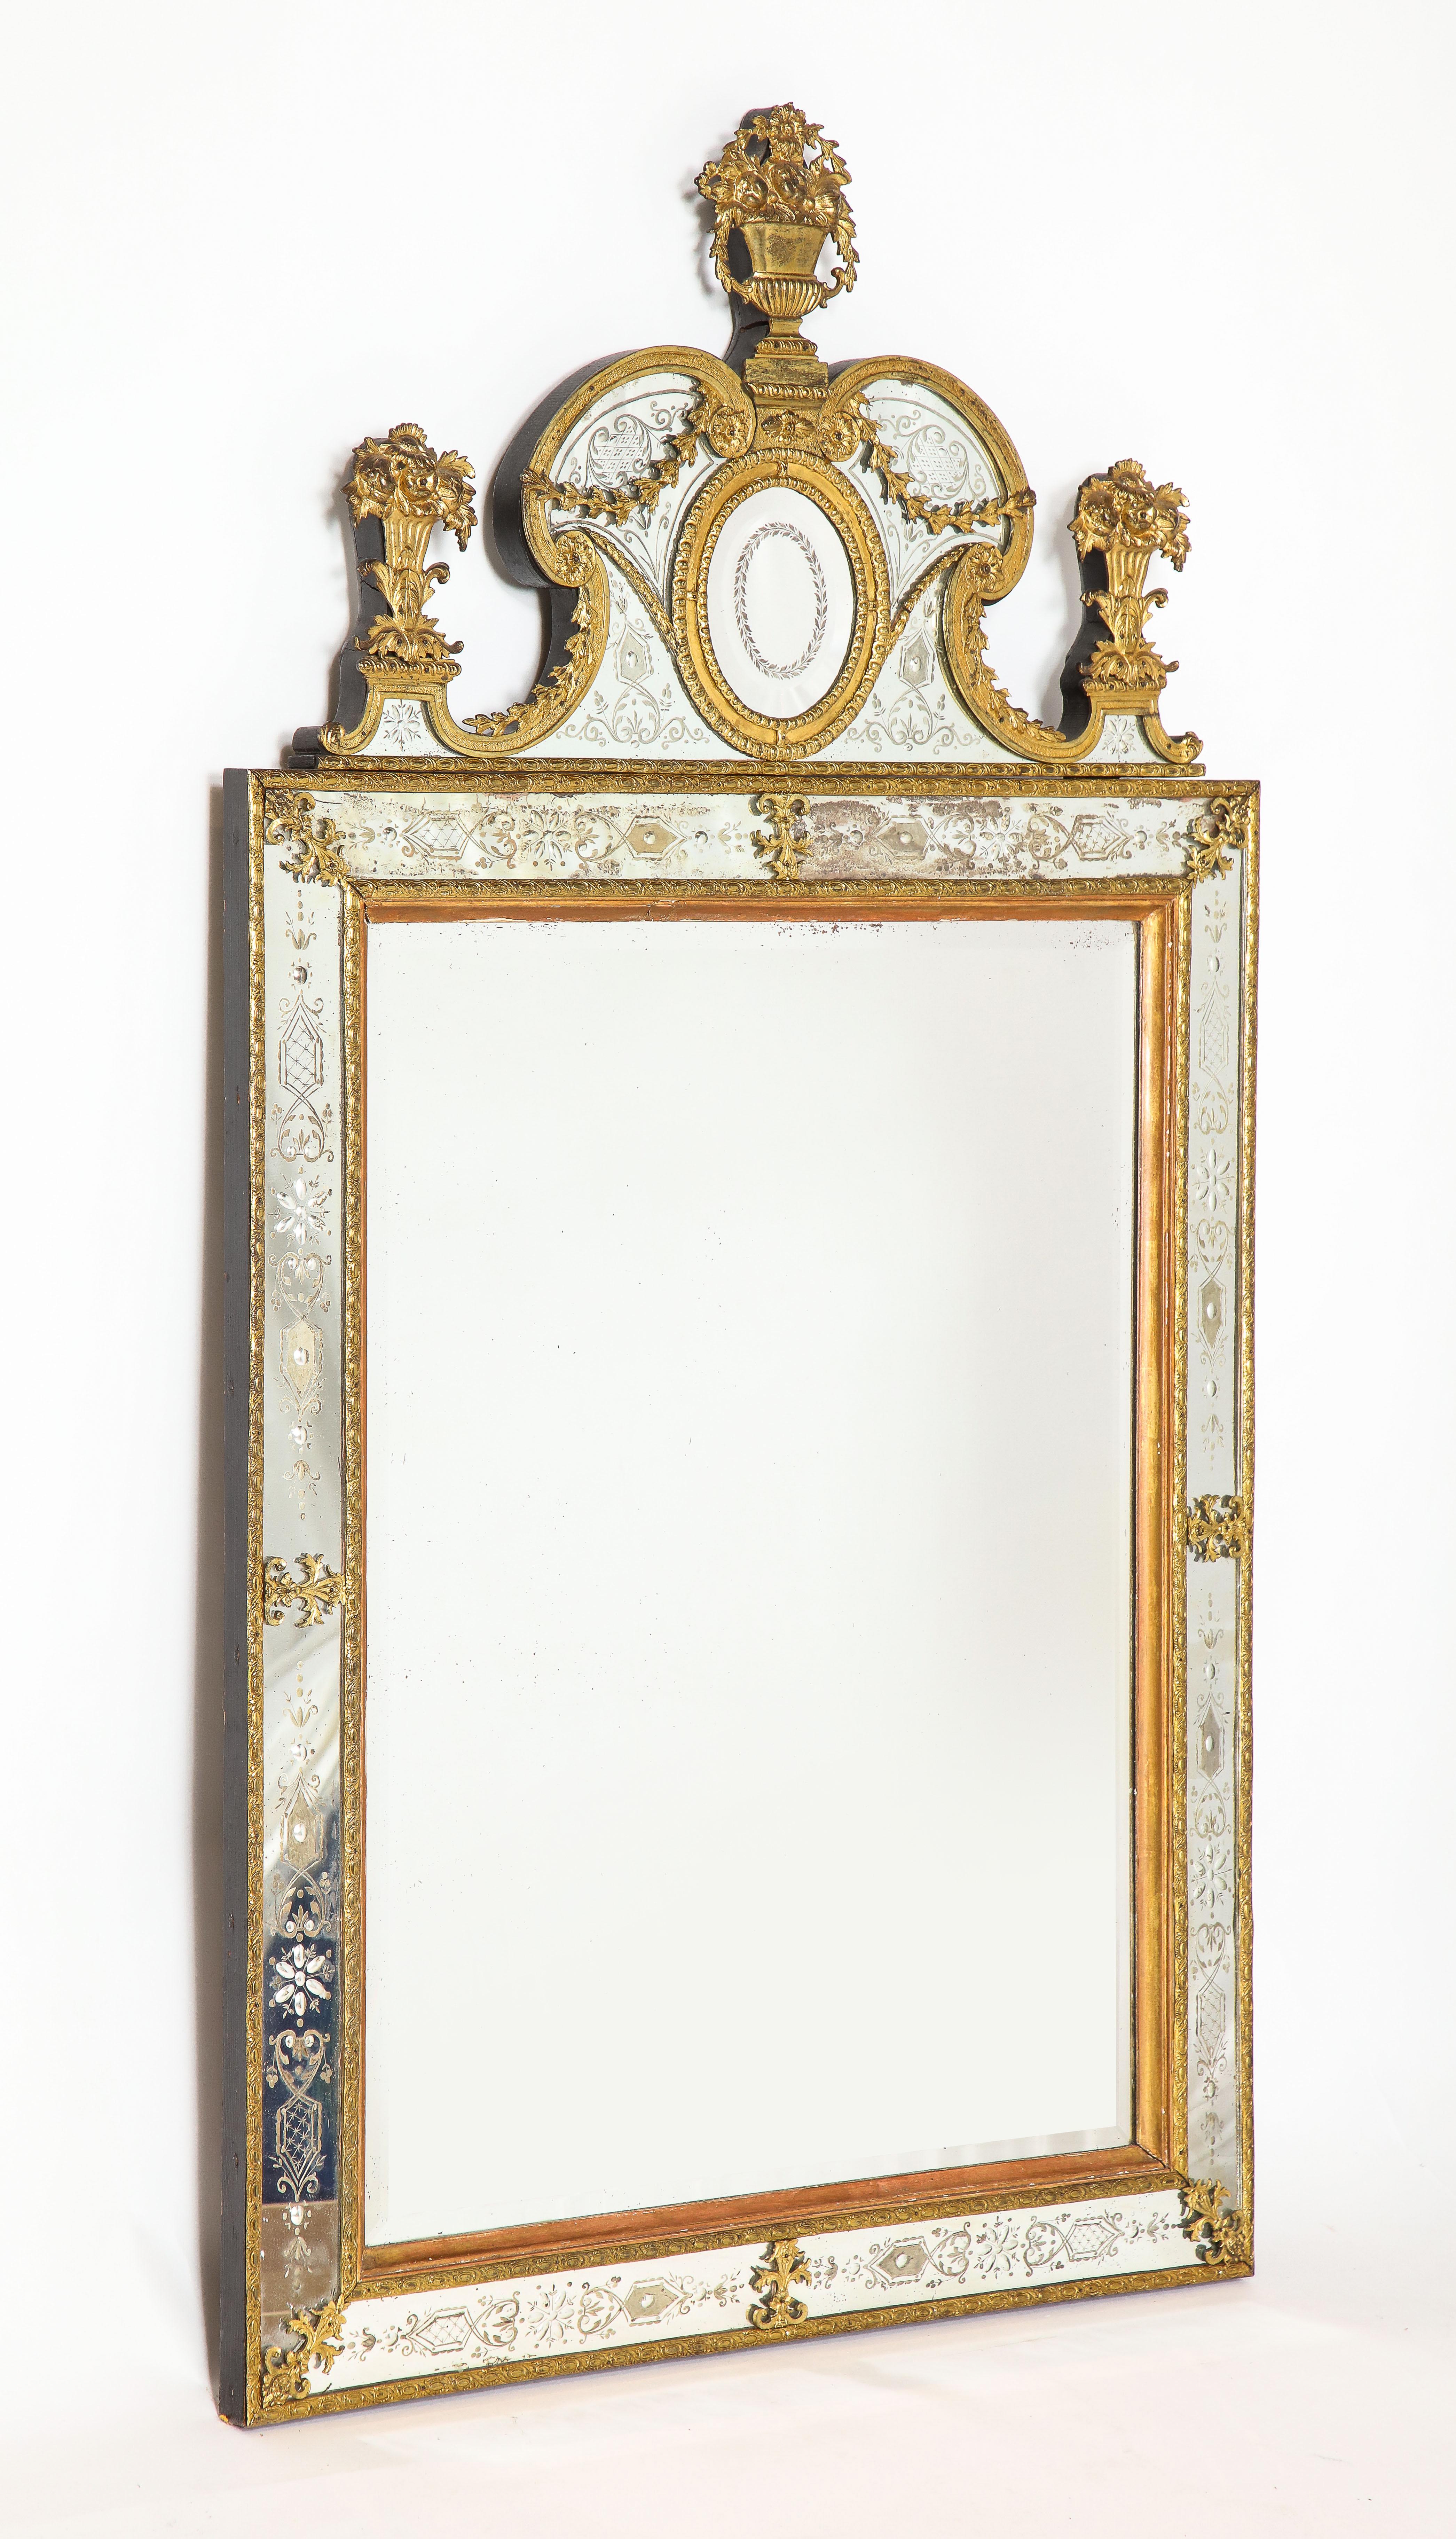 A Two Fabulous of Swedish Ormolu-Mounted and Hand-Etched Glass Mirrors After the Model by Gustav Precht, Second Half of the 19th century. With 